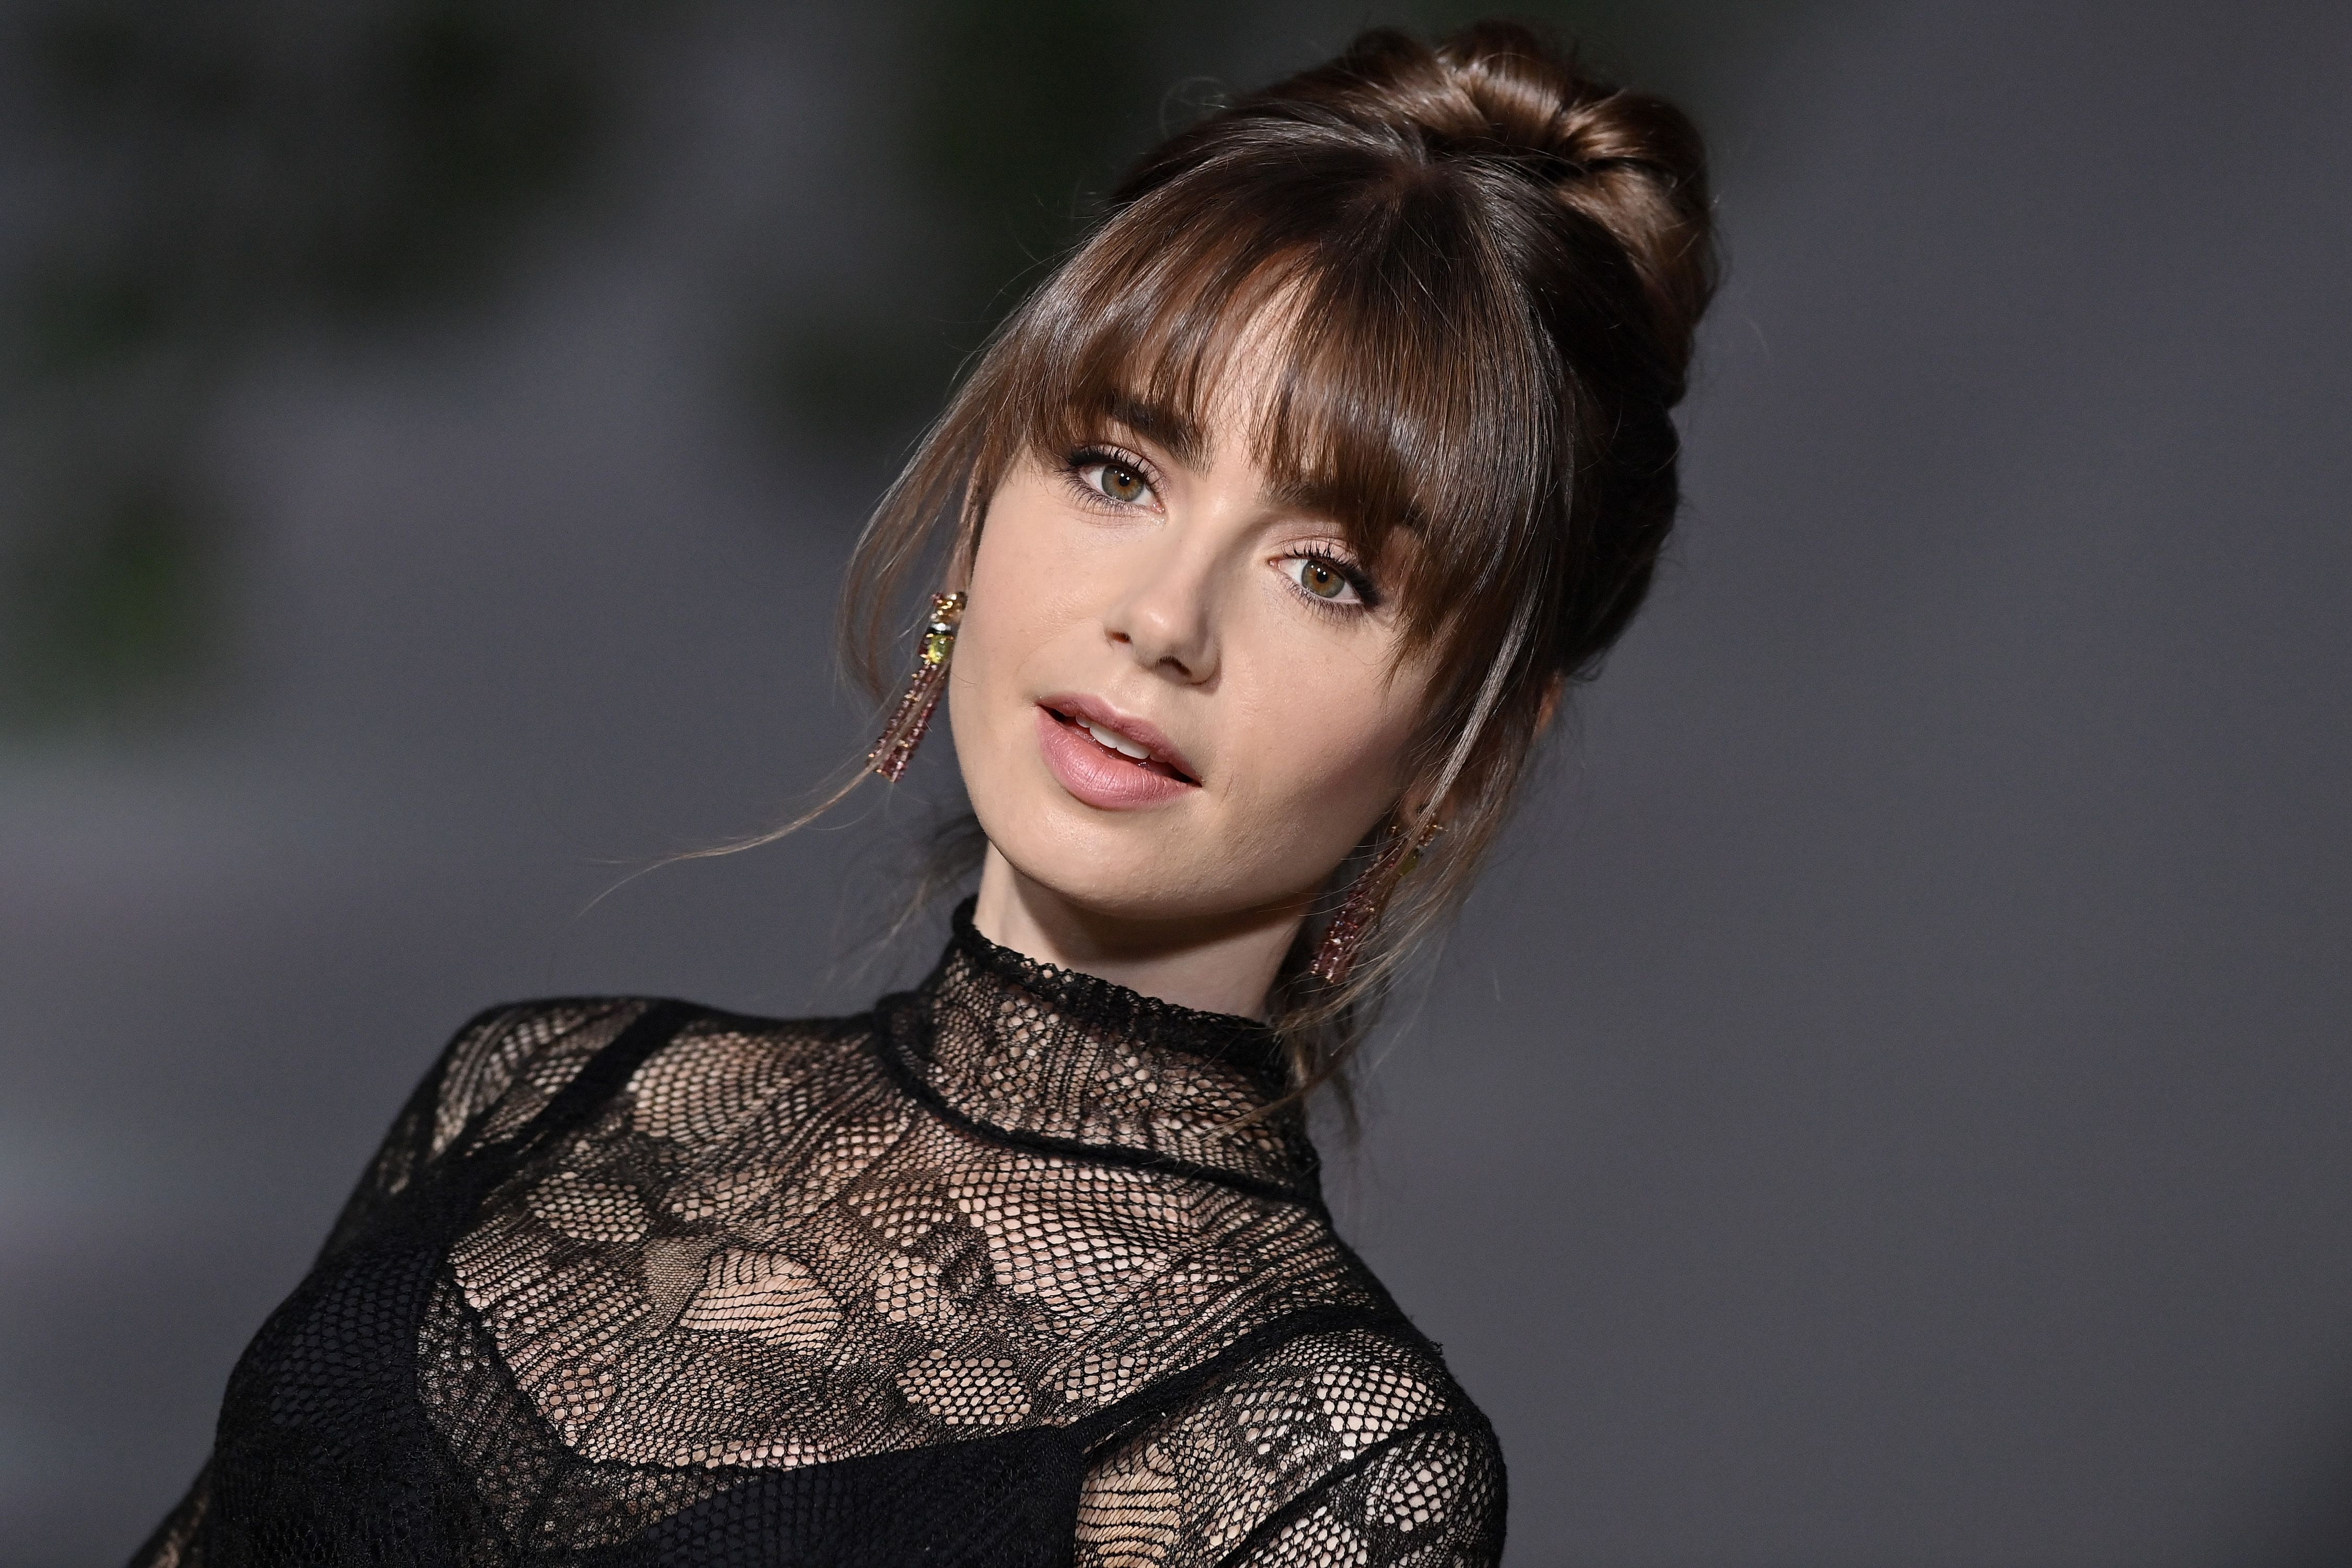 Emily in Paris Star Lily Collins Just Shared New Looks from Season